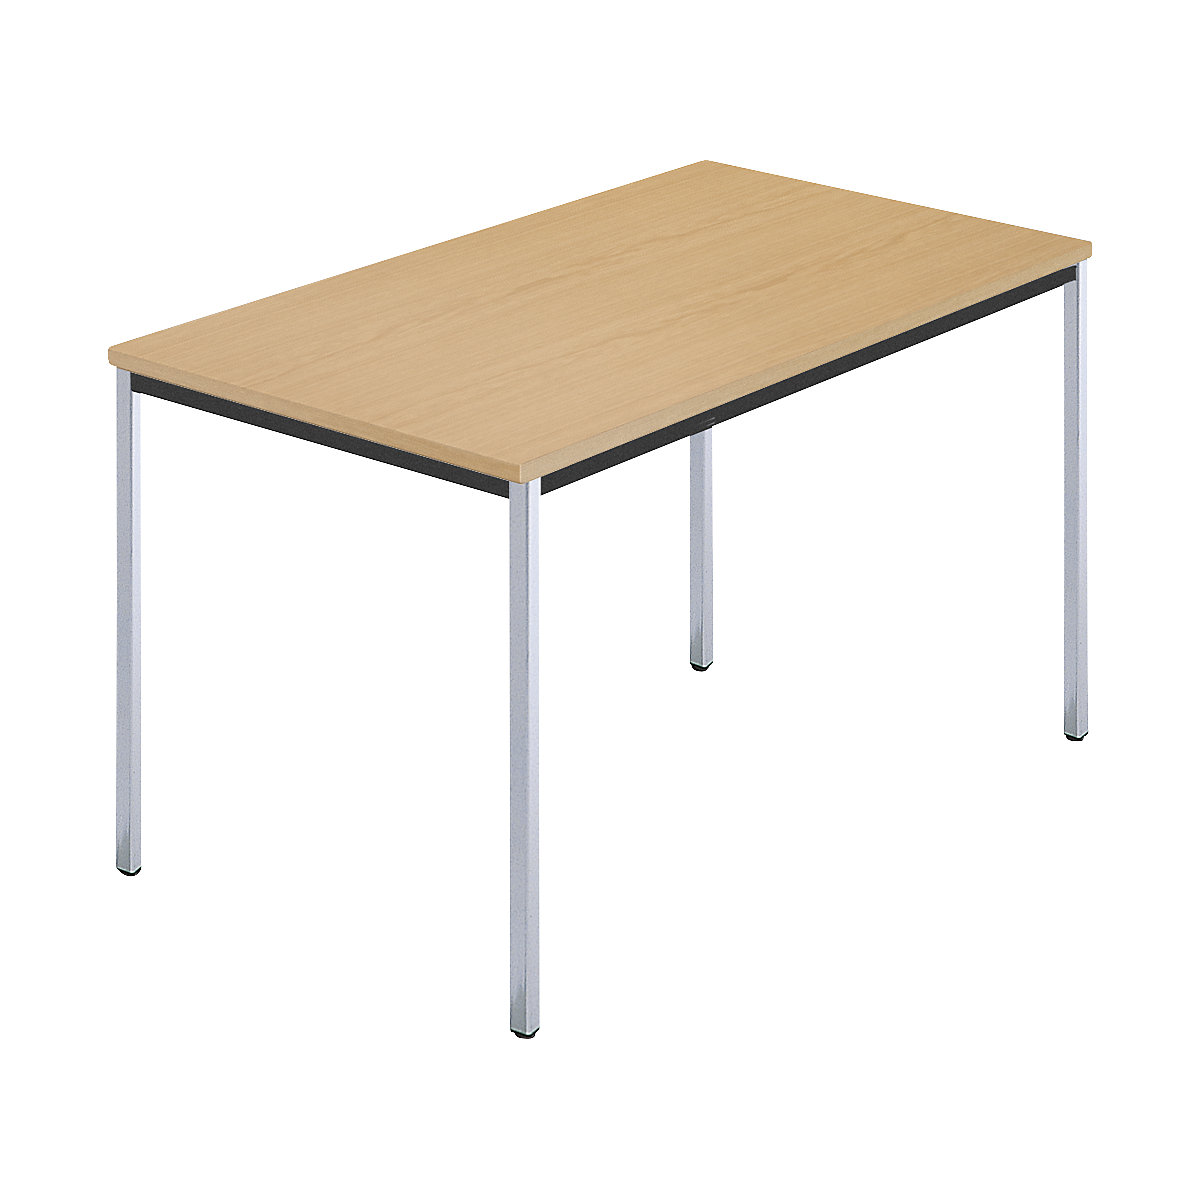 Rectangular table, square tubular steel chrome plated, WxD 1200 x 800 mm, natural beech finish-4